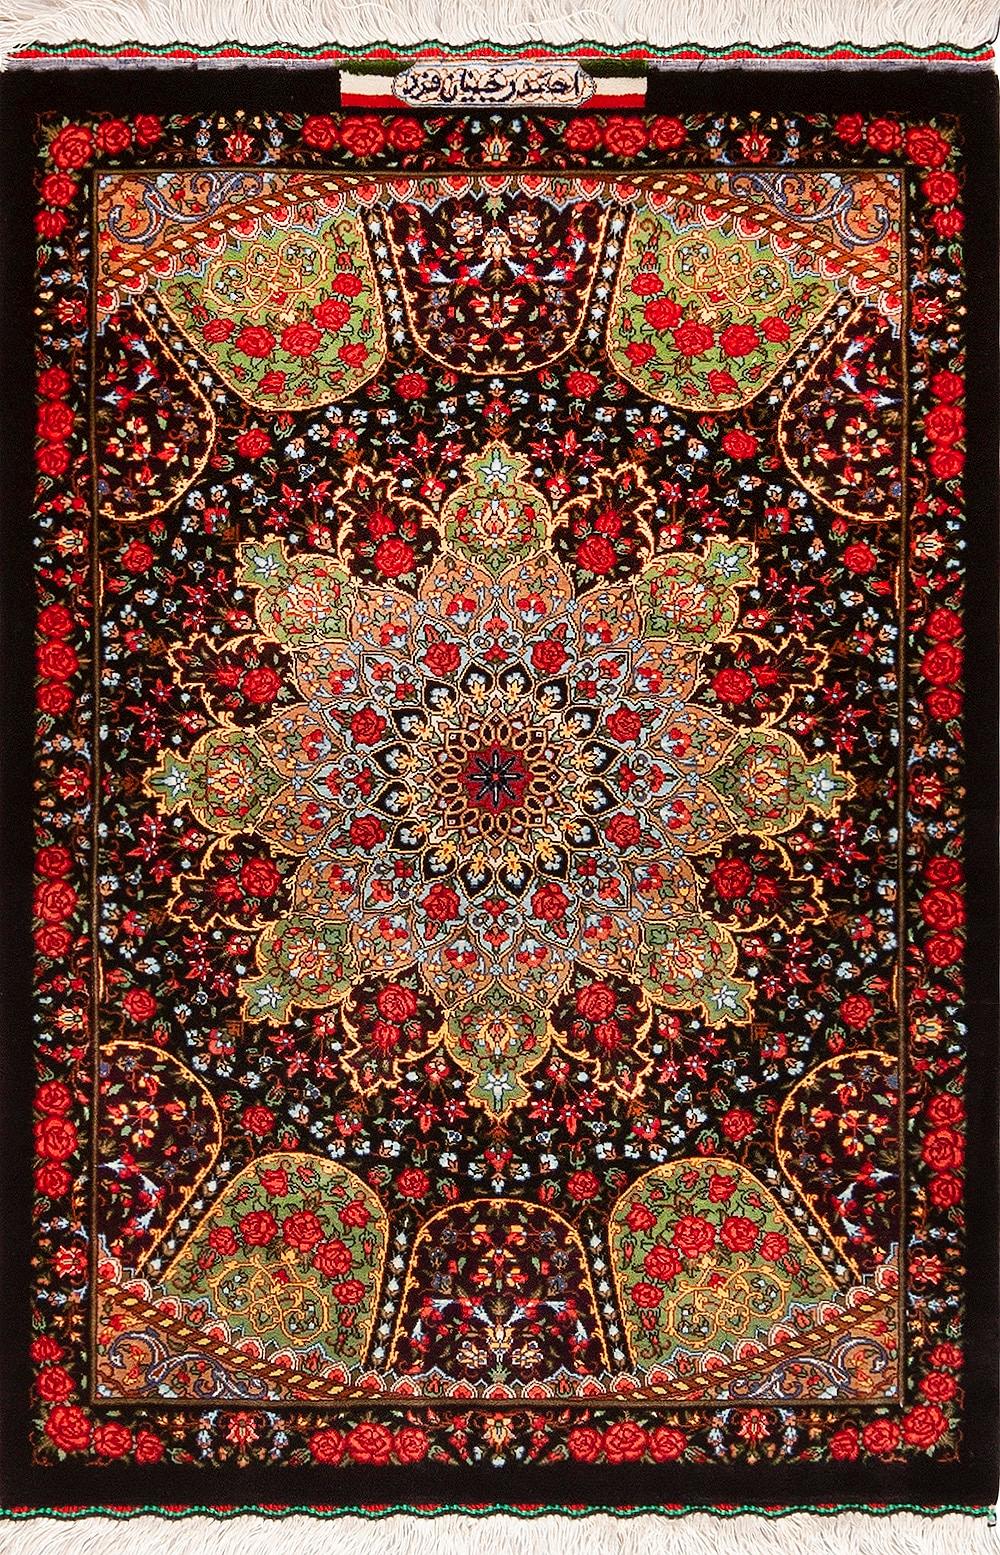 Hand-Knotted Magnificent Fine Small Size Luxurious Vintage Persian Qum Silk Rug 2' x 3' For Sale